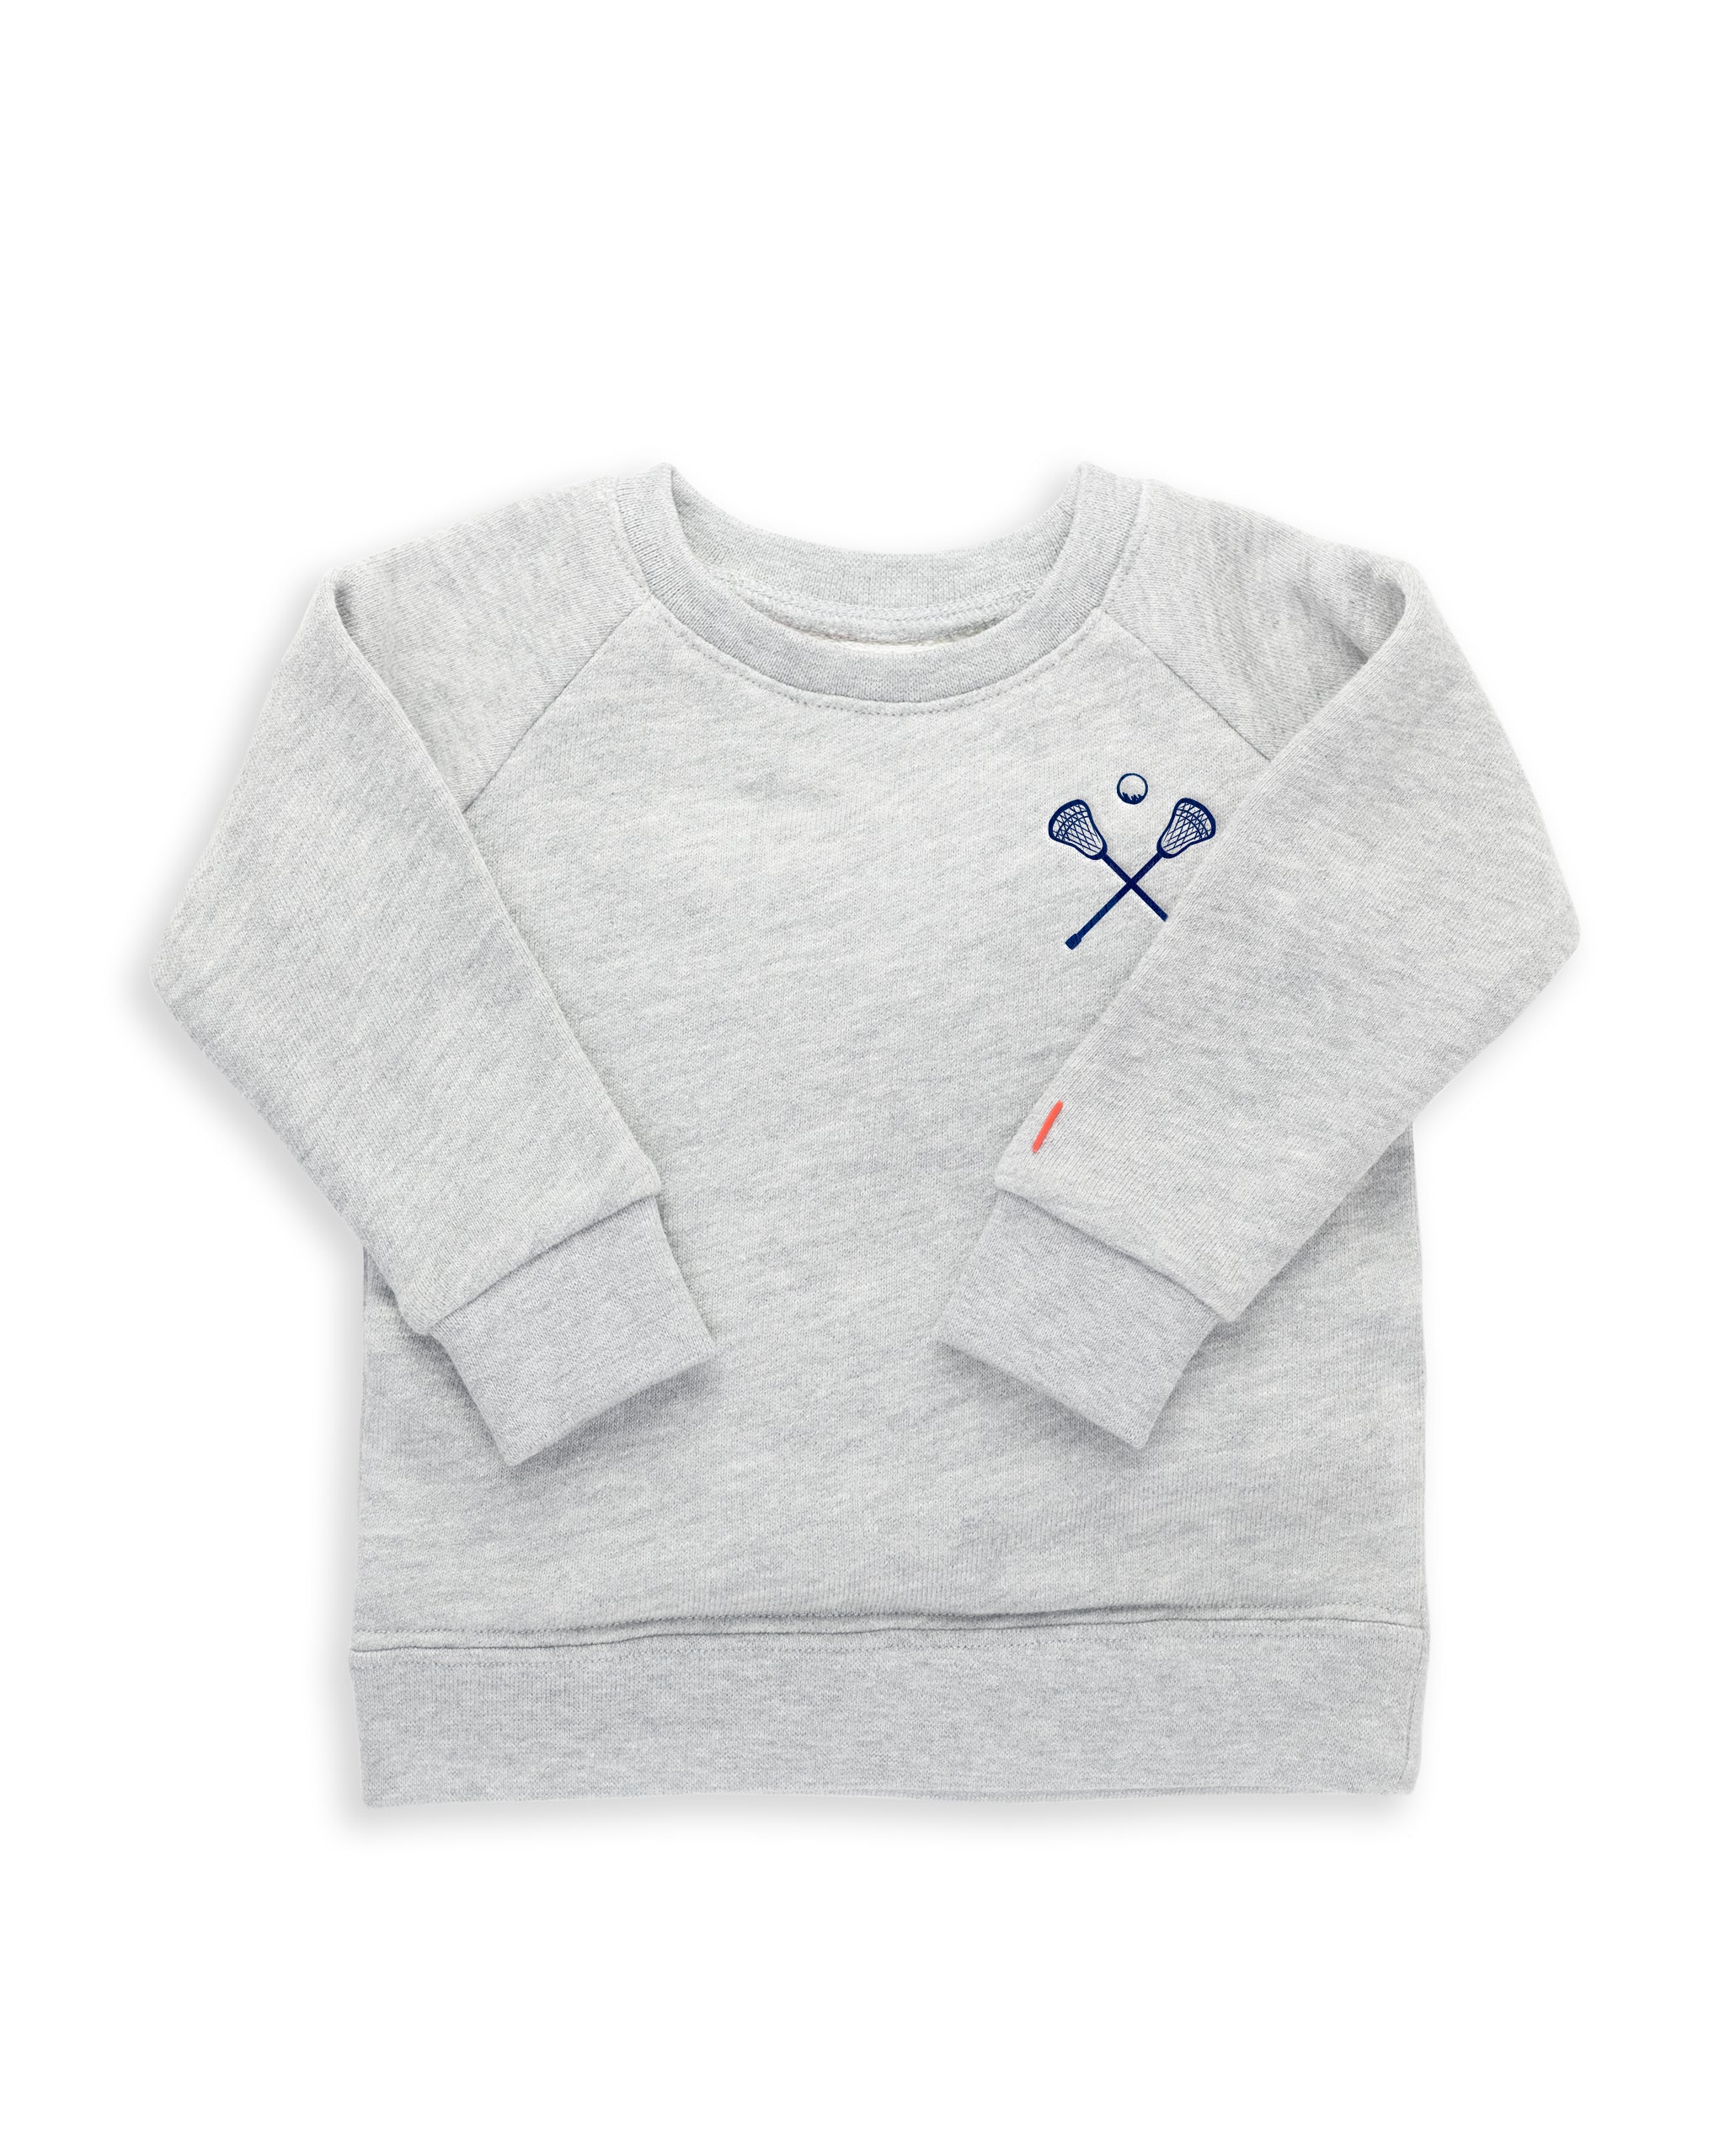 The Organic Embroidered Pullover Sweatshirt [Heather Grey Lacrosse]